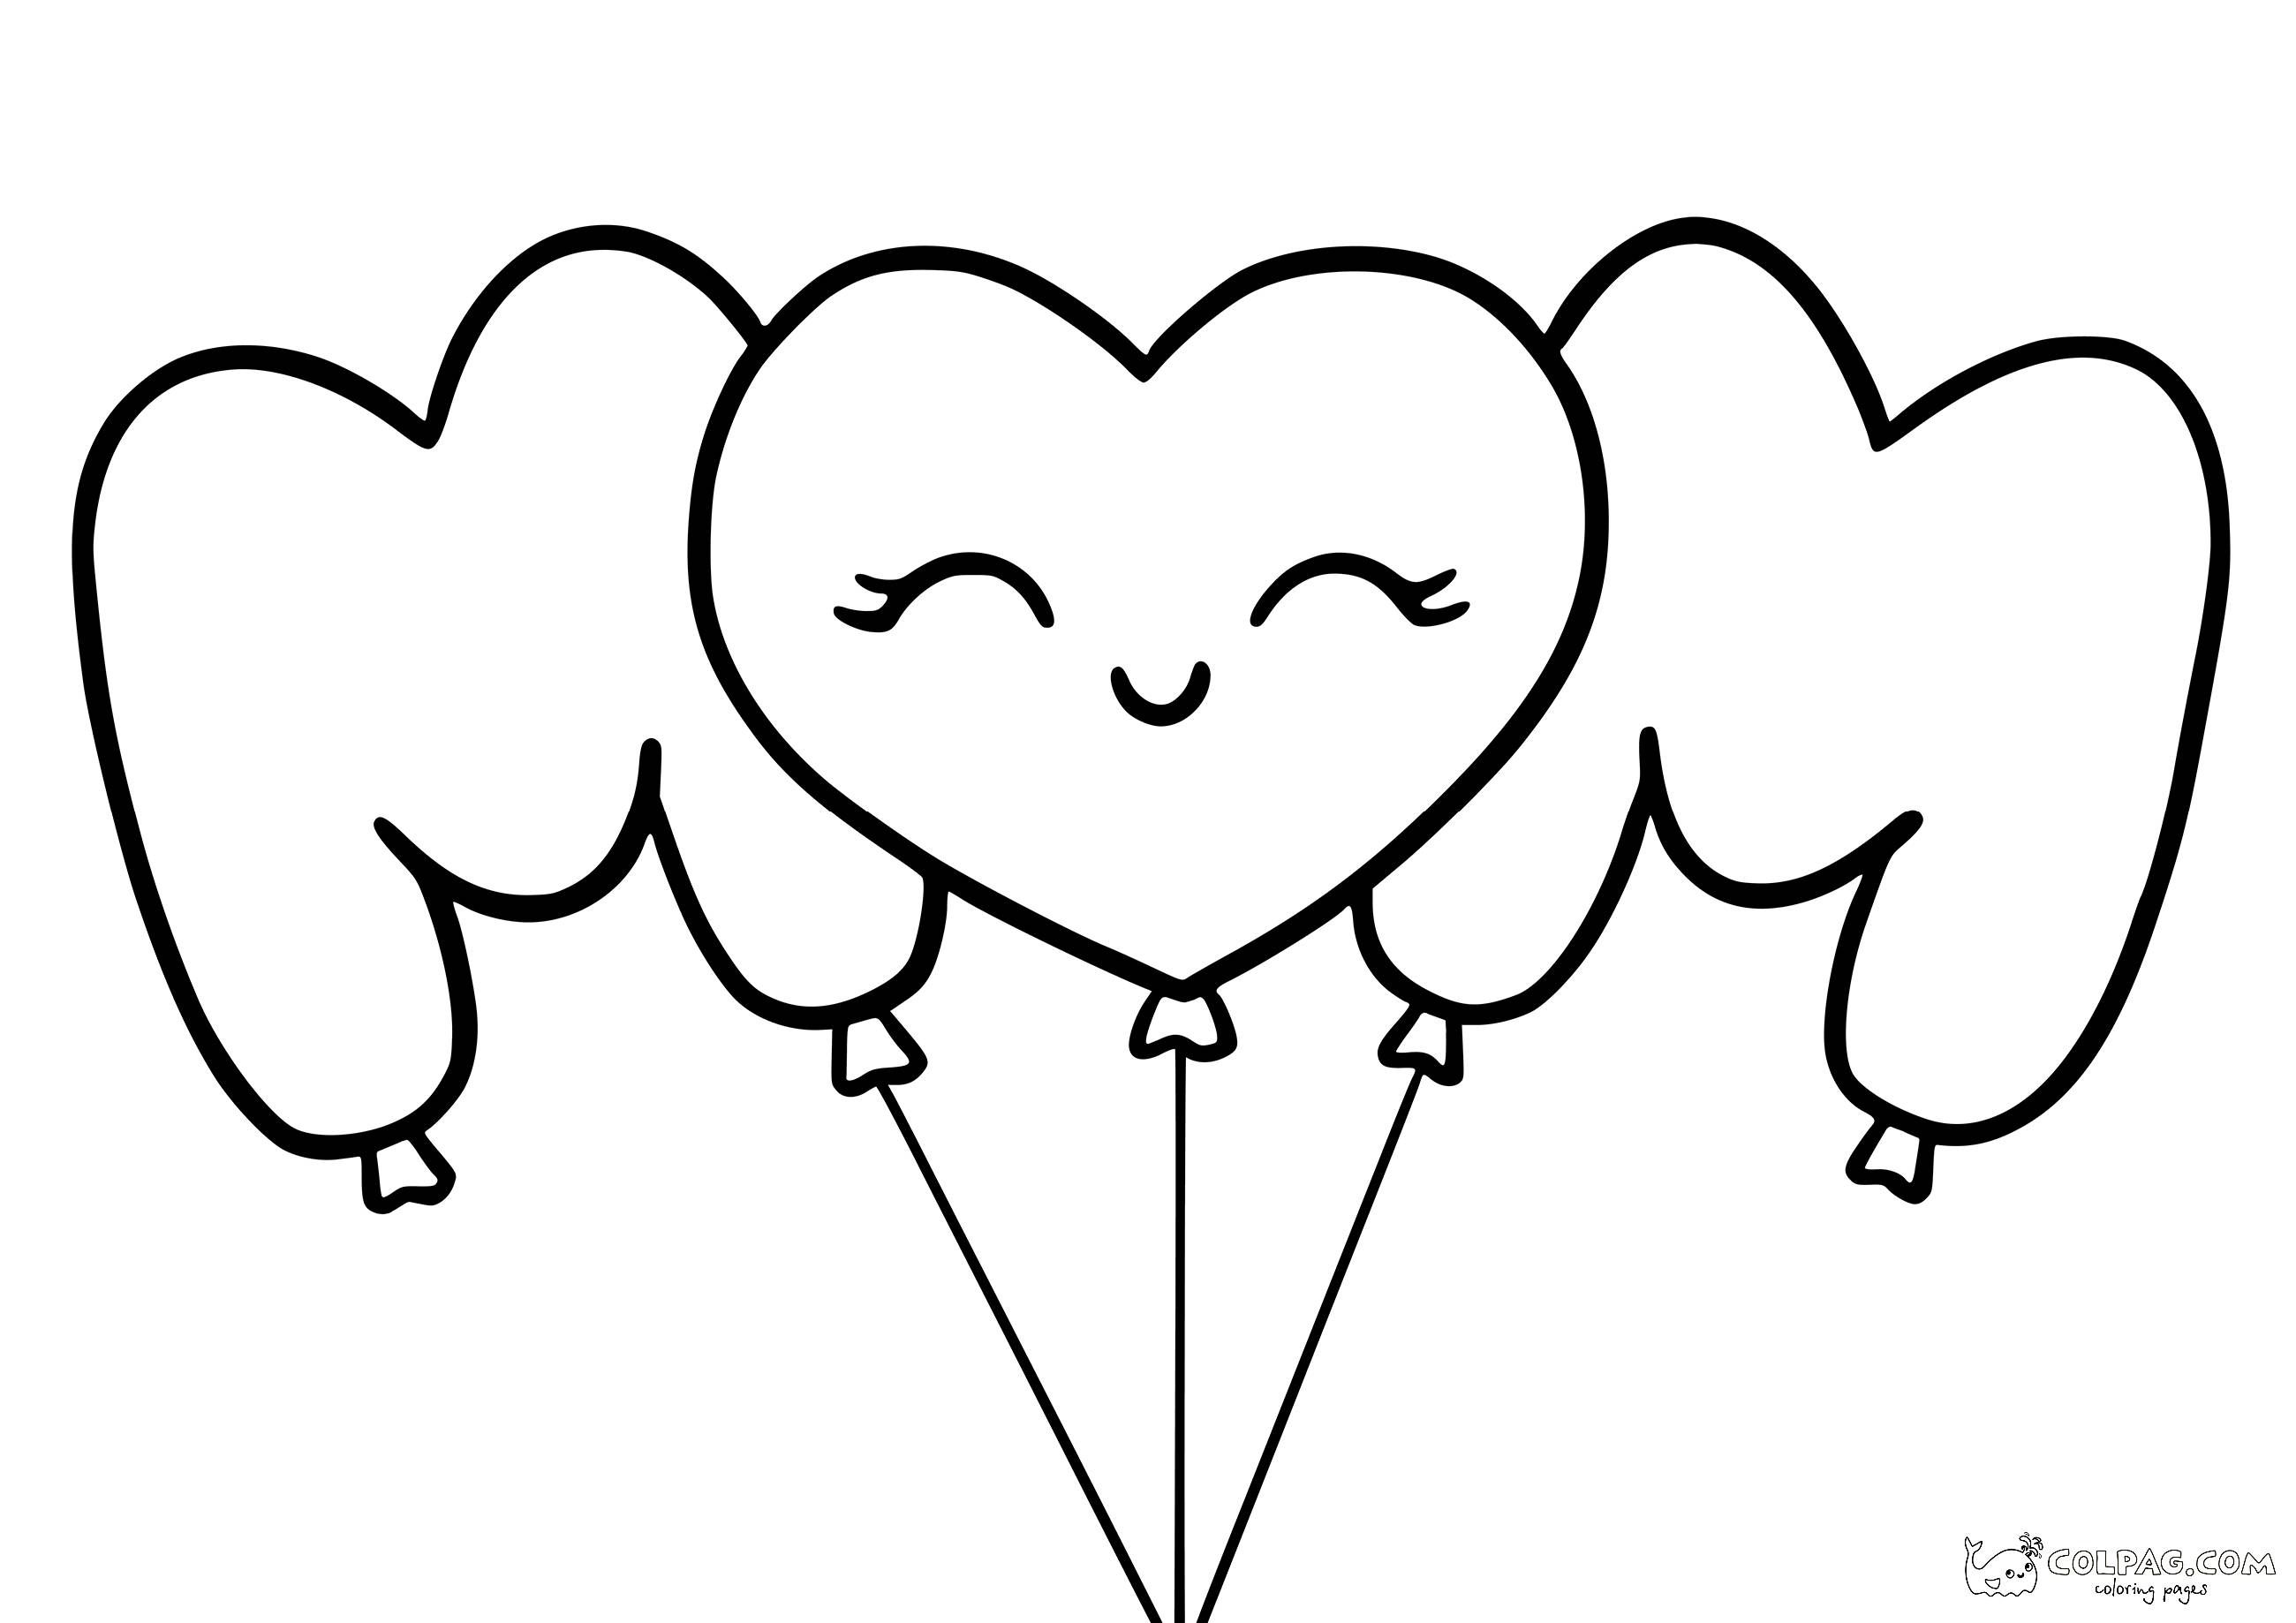 34-smiling-mom-baloons-coloring-page-colpag-34